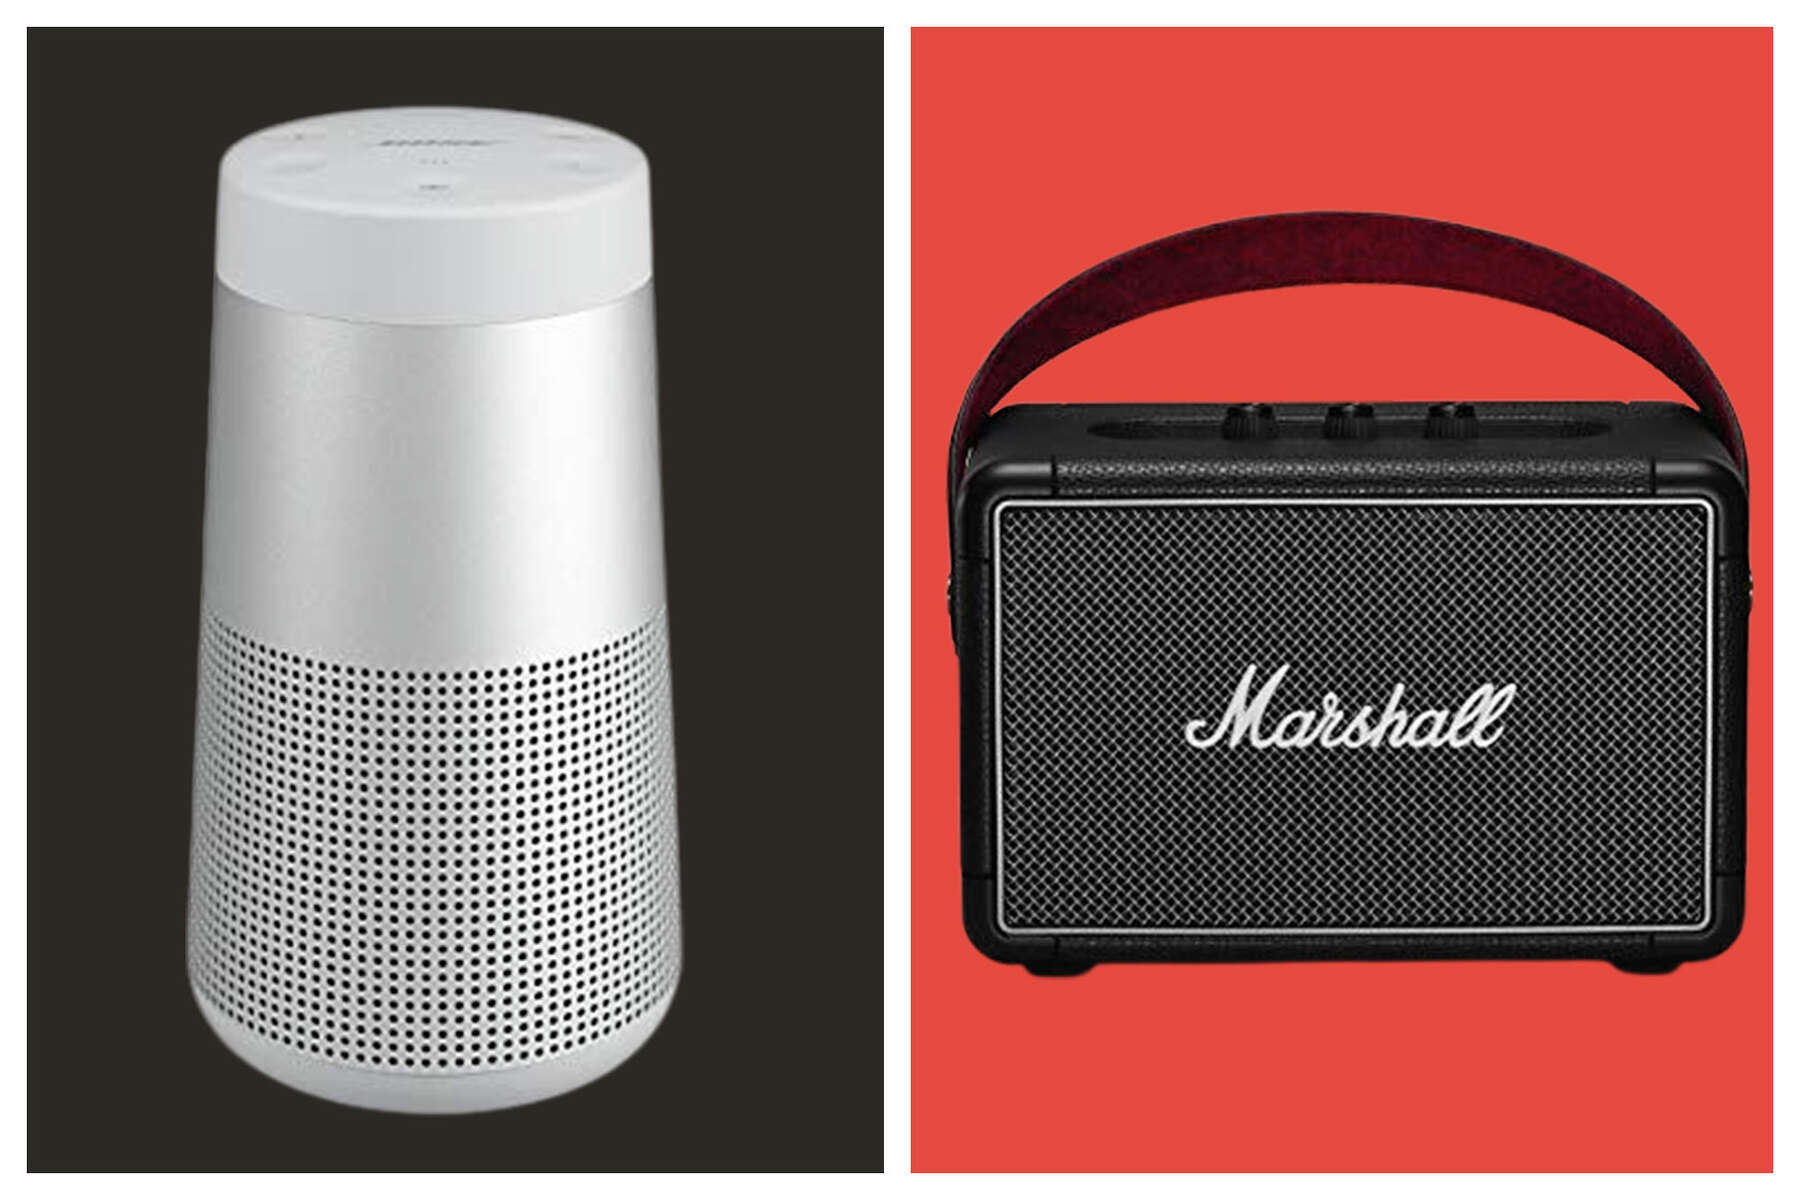 vs. Bose bluetooth speakers: Which is best for your needs?